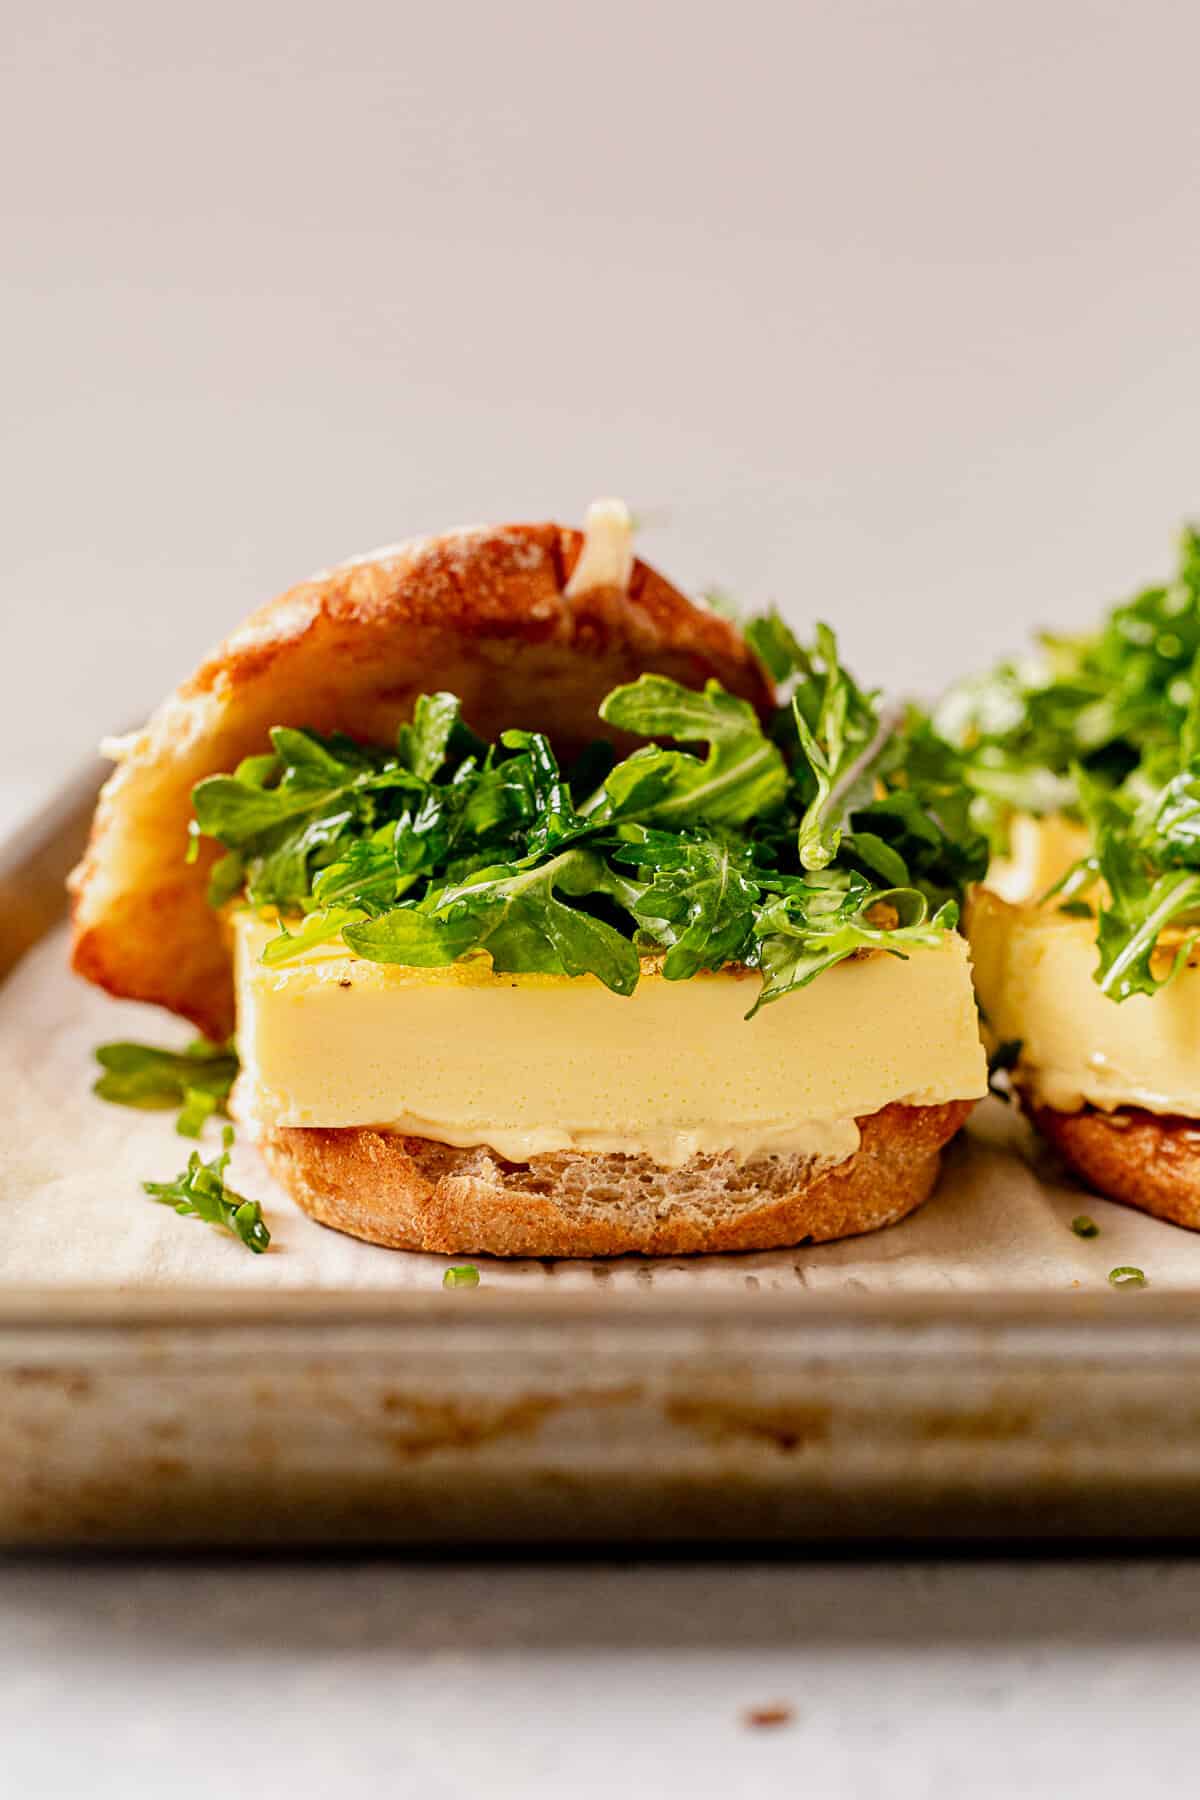 fluffy souffled eggs on a bun with greens and melted cheese